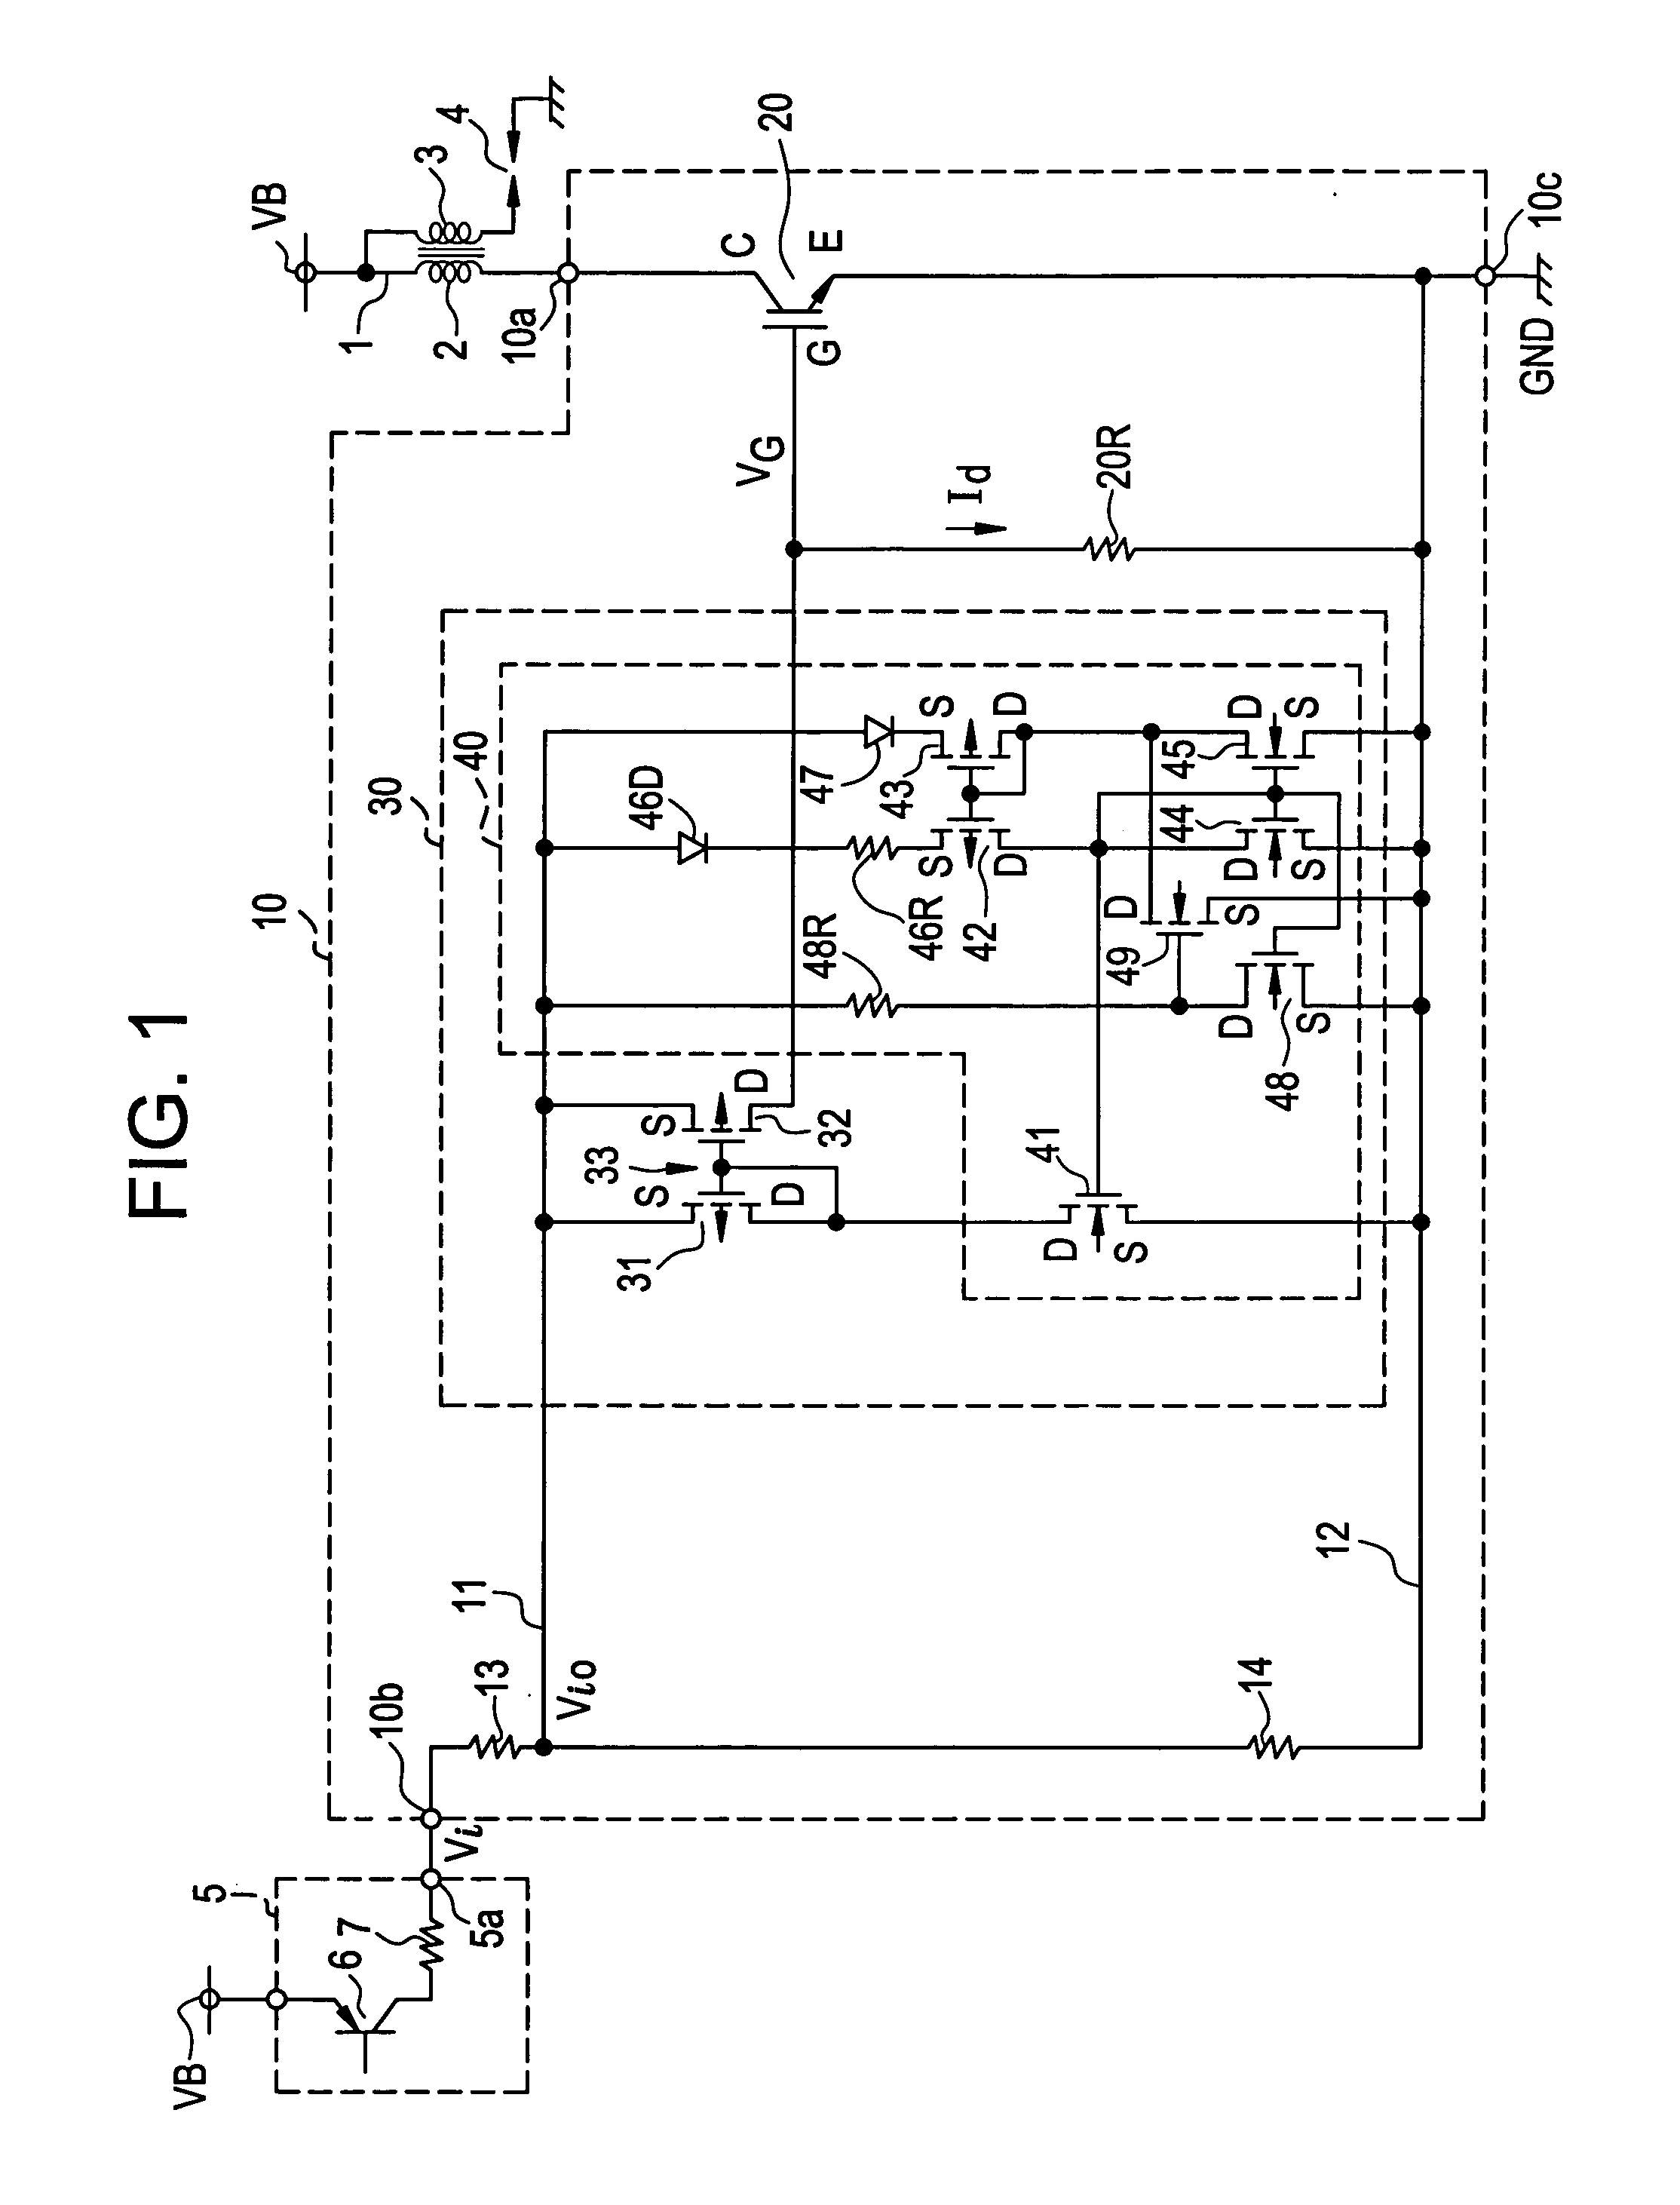 Internal combustion engine ignition apparatus